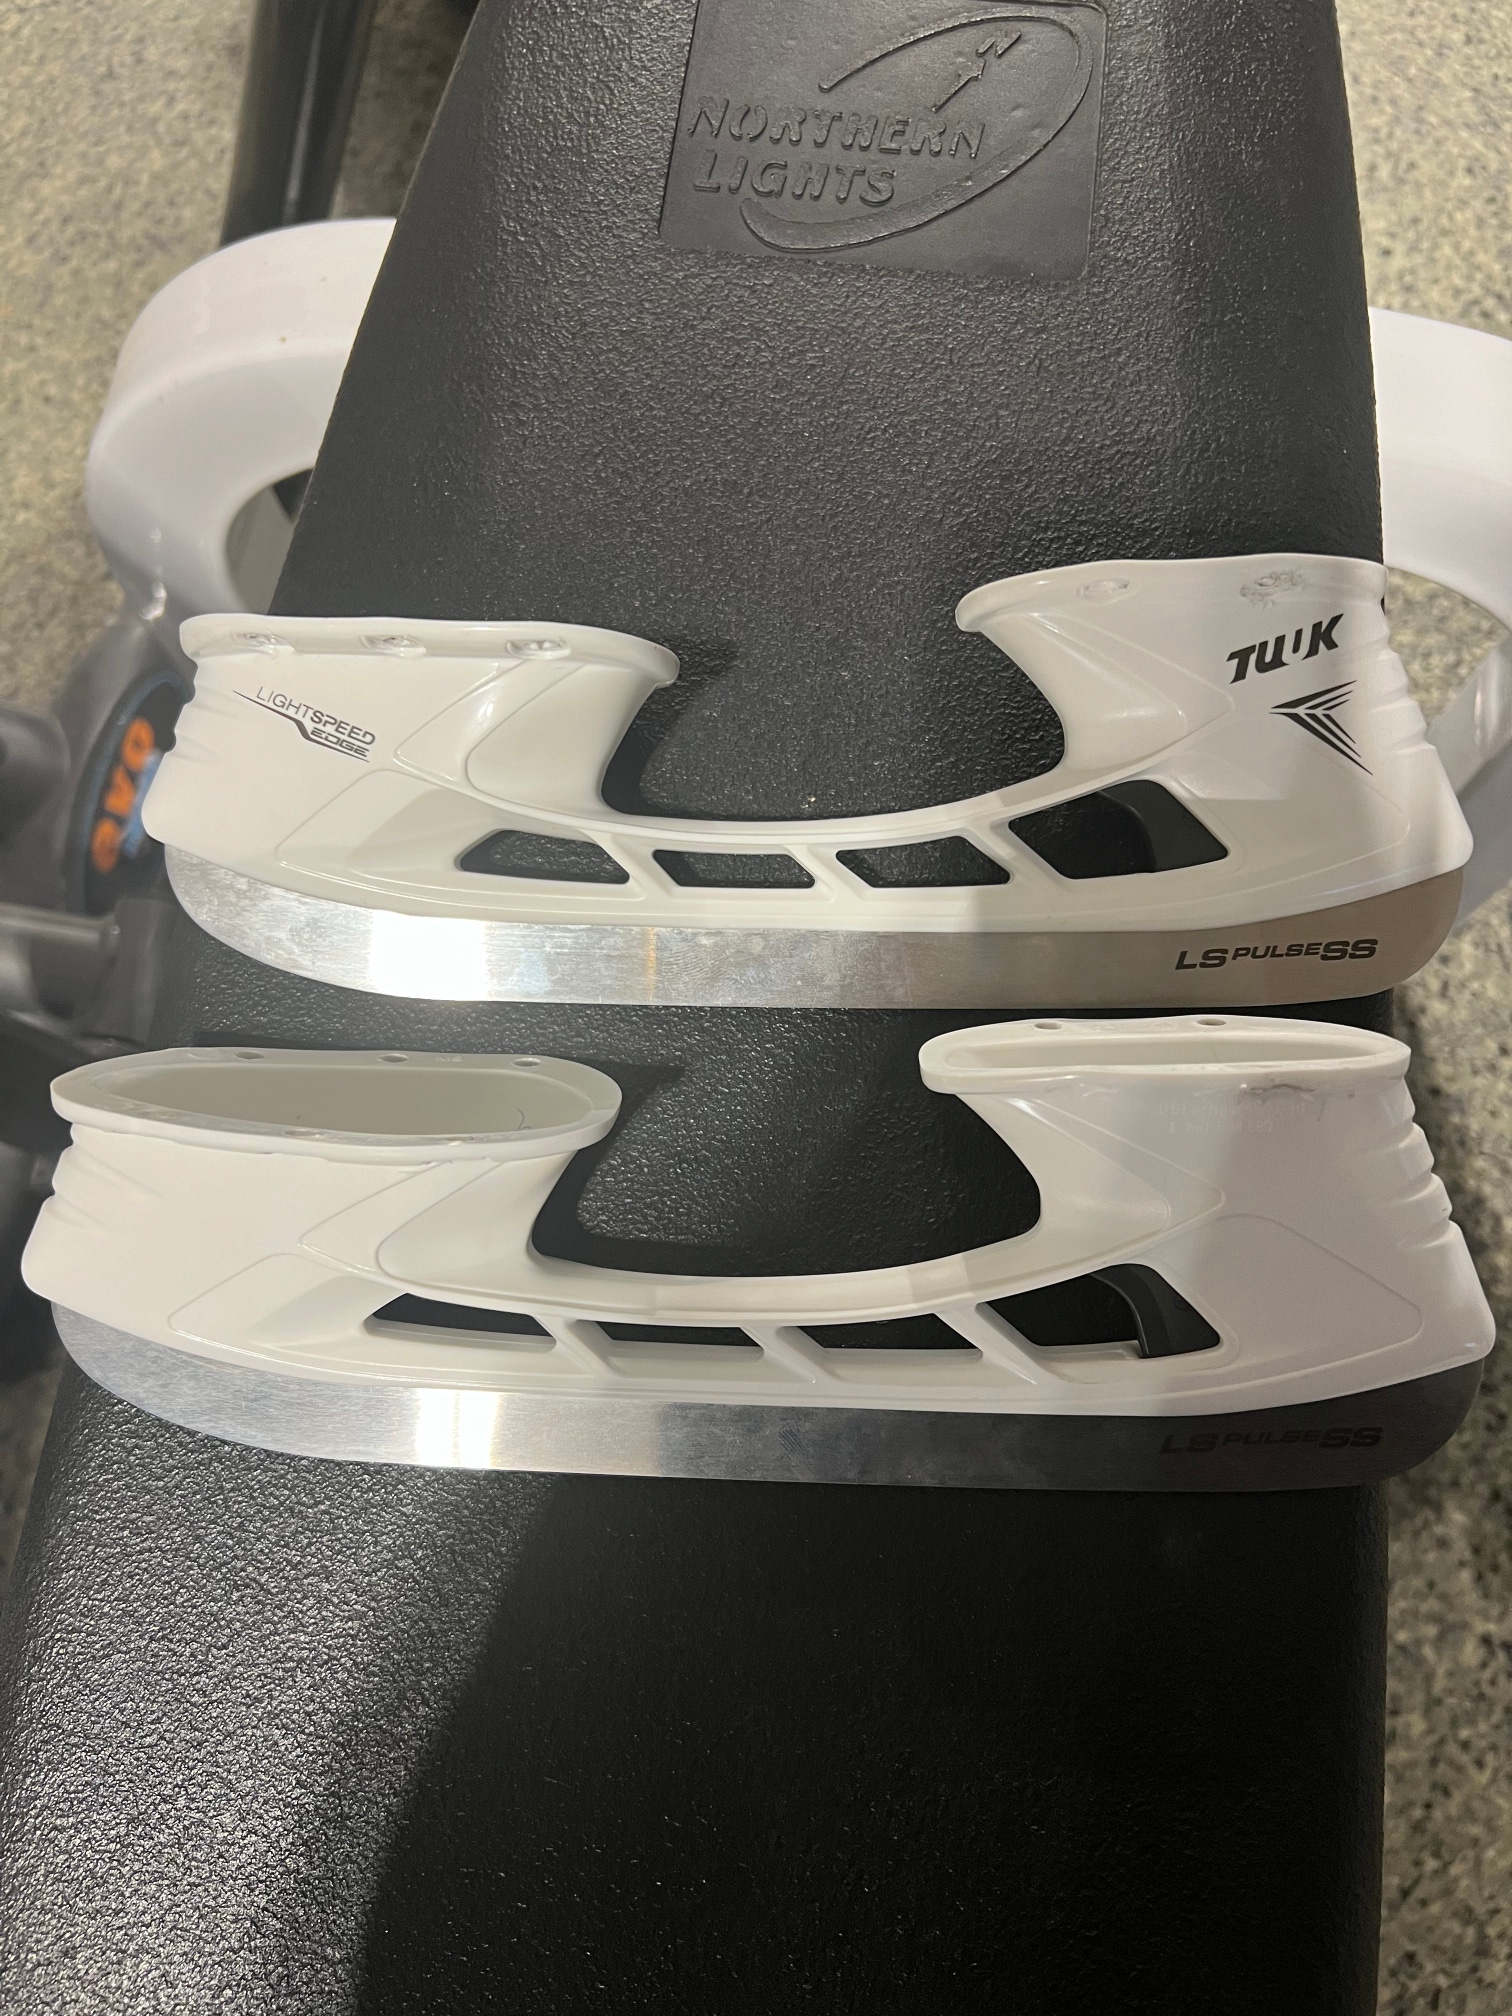 New Bauer Tuuk lightspeed edge 230 mm with 2 sets of steel